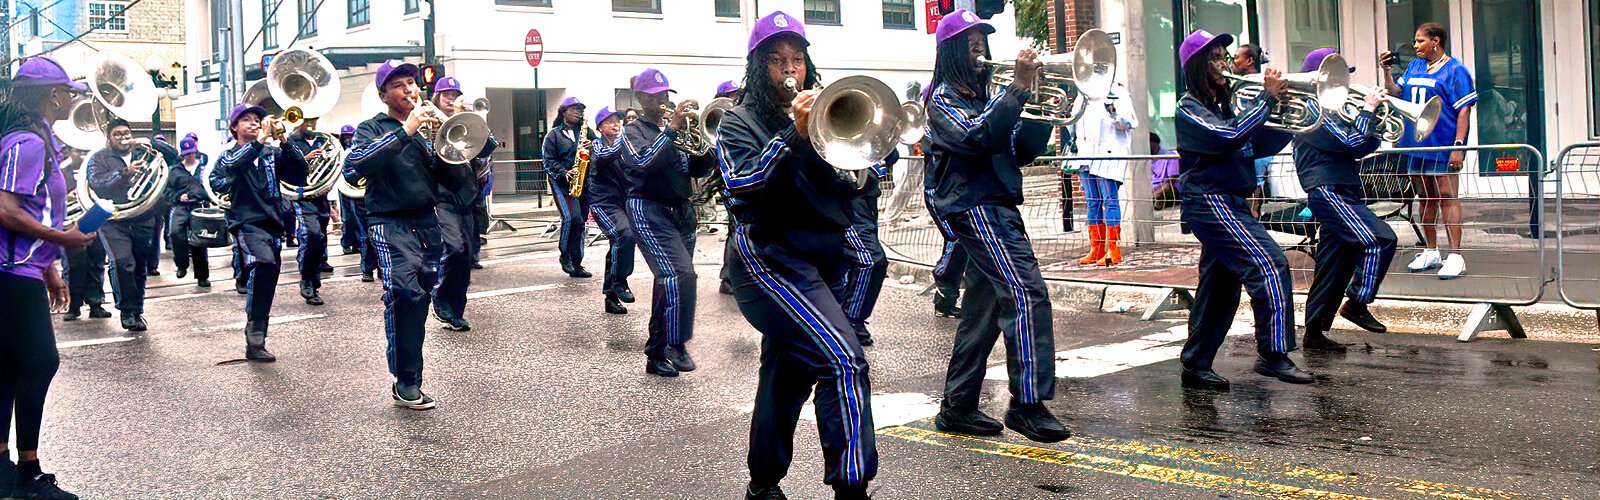 The Spartan Marching Band of Richard C. Spoto High School in Riverview marches down 7th Avenue in Ybor City during the AEAONMS parade on August 23rd in Ybor City.